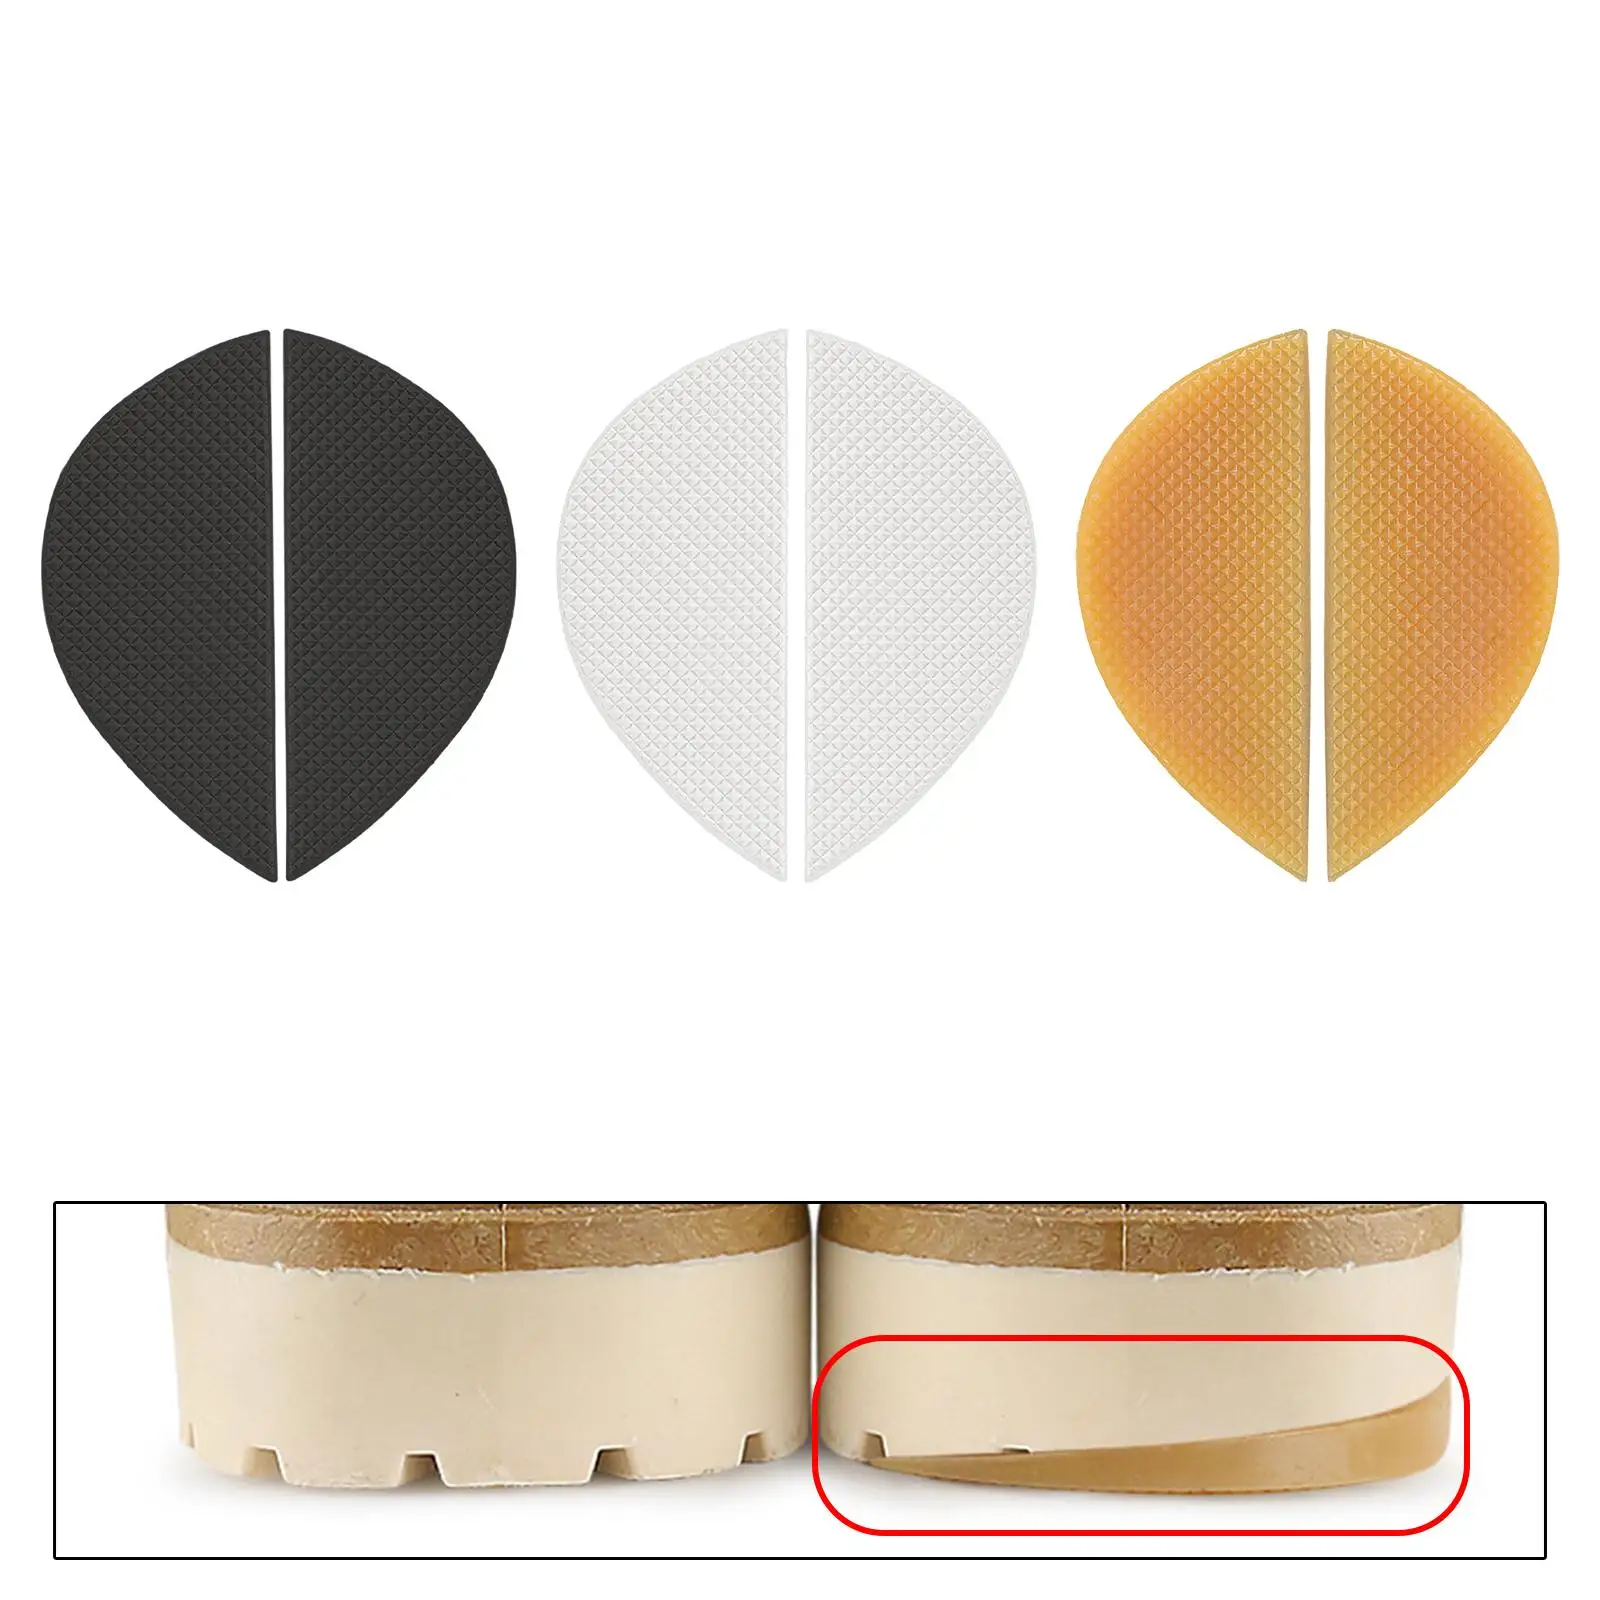 Heel Plates Anti Skid Shoe Pads 7mm Thickness Shoe Grips Shoe Sole for Shoes Heels DIY Sports Boots Leather Shoes Sneakers